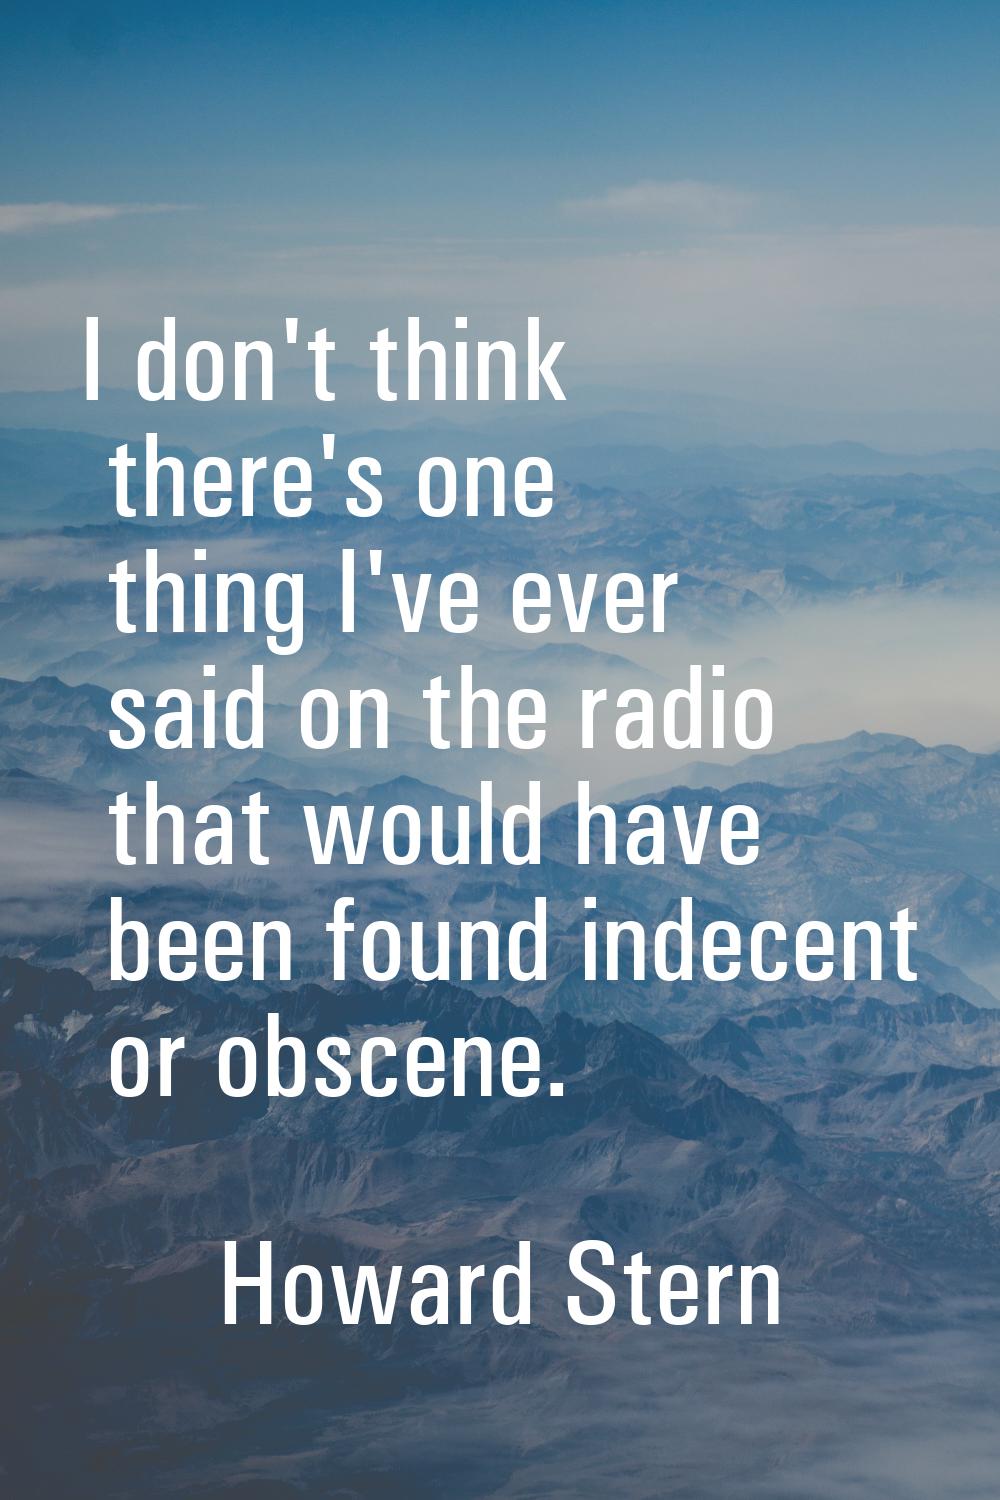 I don't think there's one thing I've ever said on the radio that would have been found indecent or 